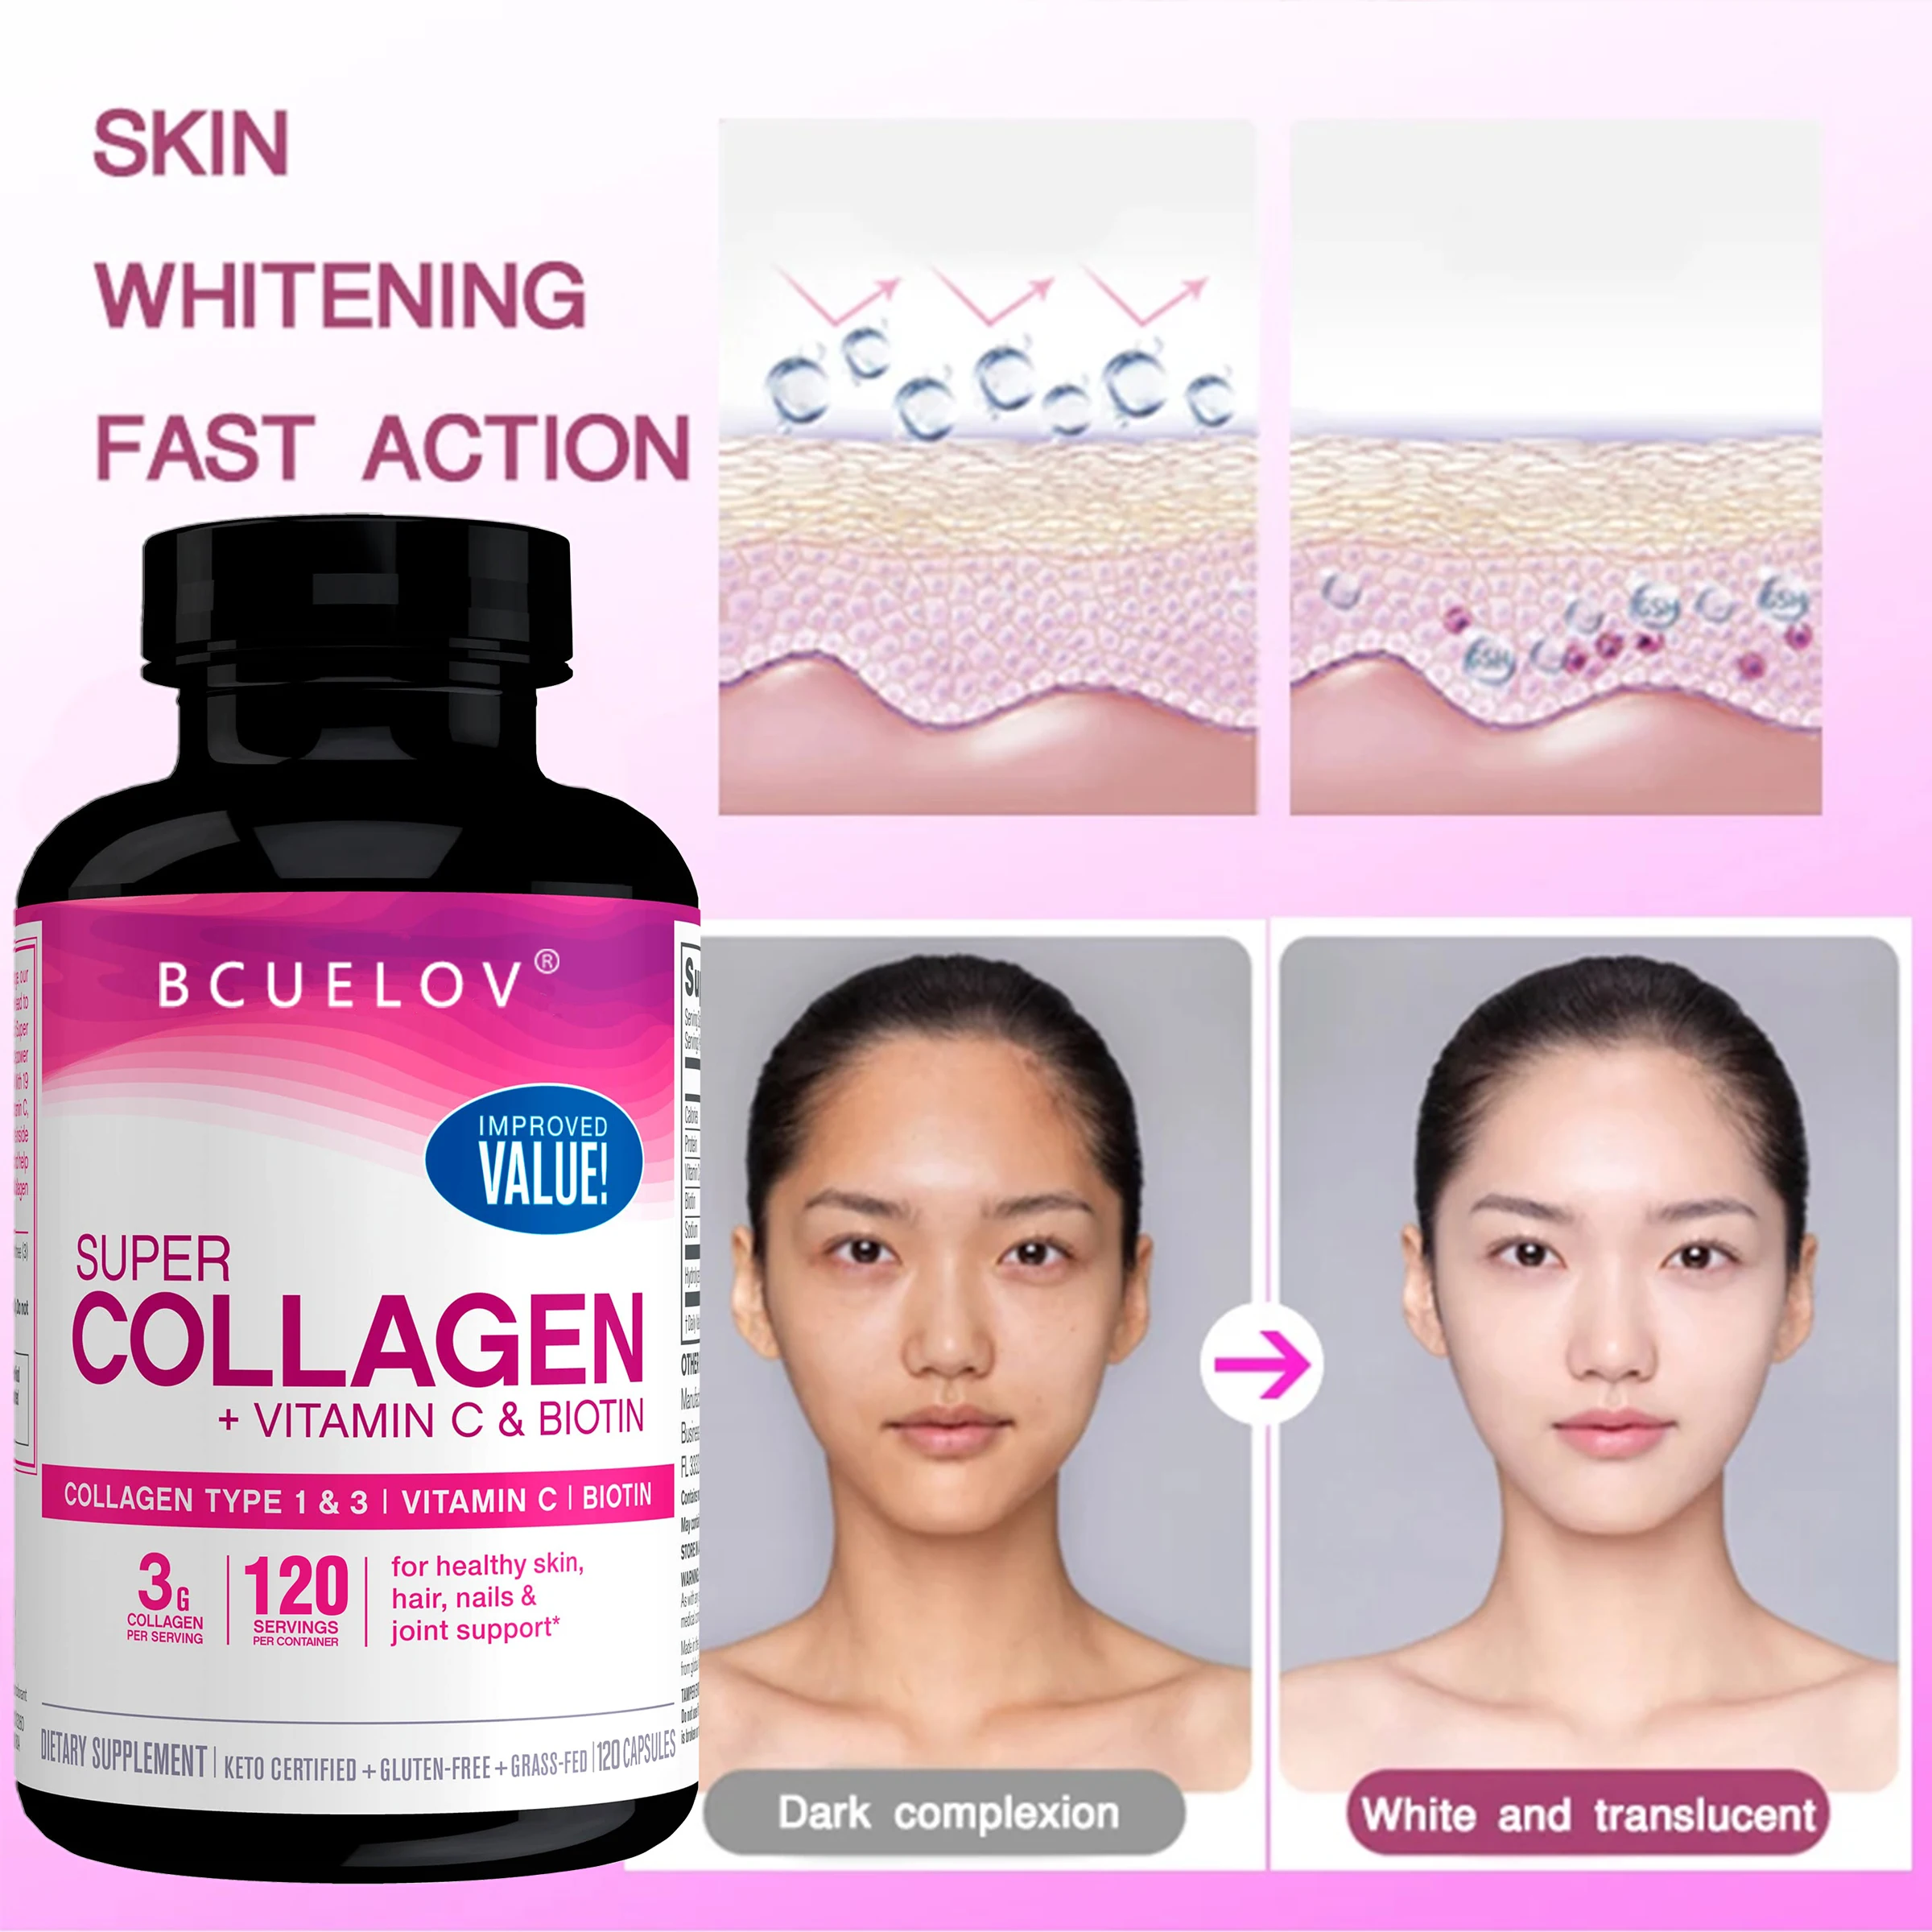 

Collagen, Vitamins and Biotin Nutritional Supplement To Restore Skin Elasticity for Brighter Skin, Healthy Hair, Skin and Nails